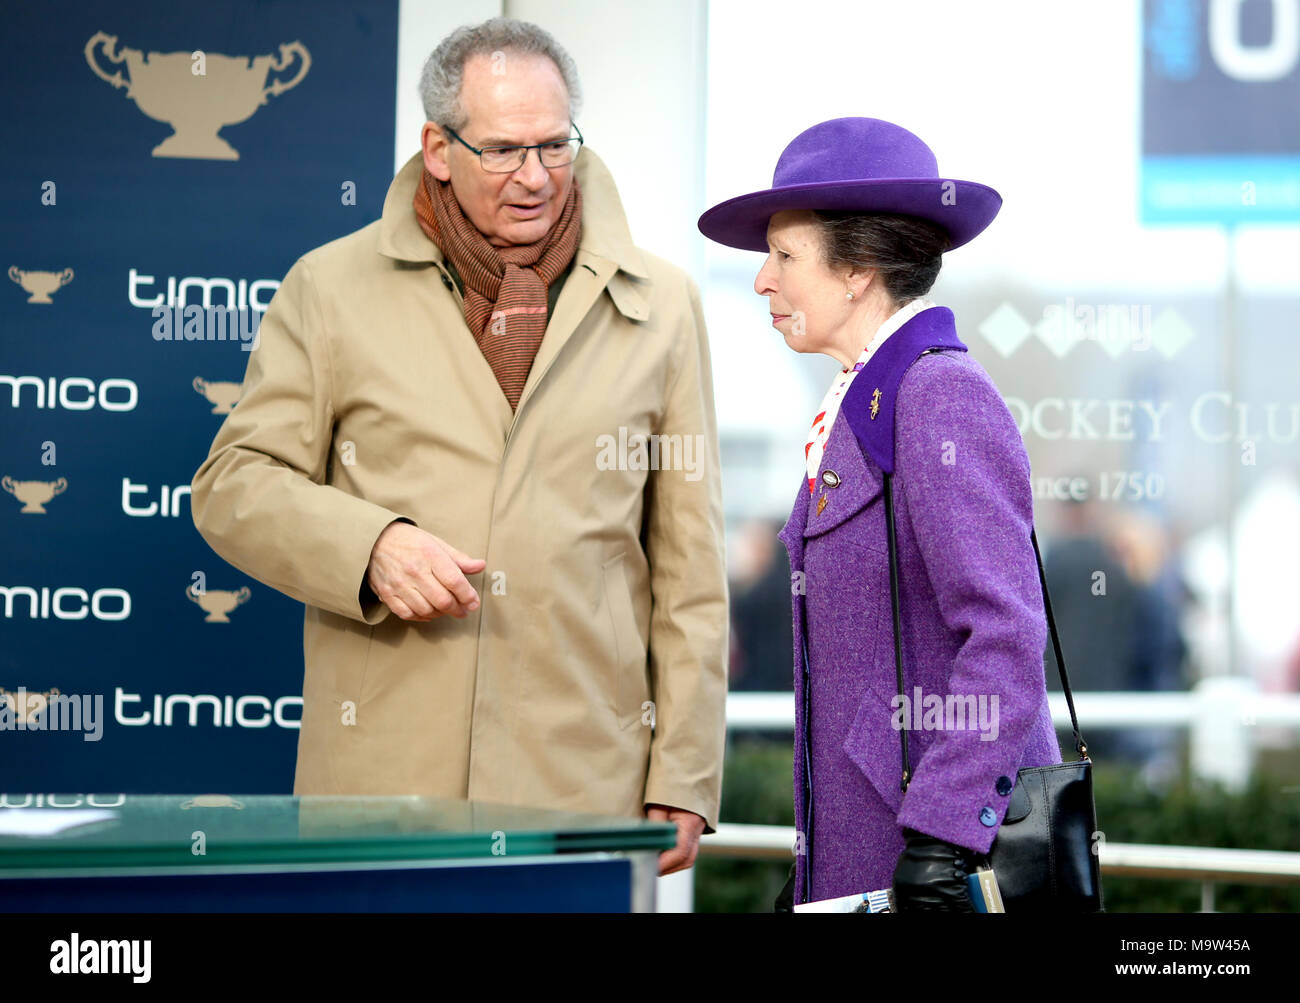 The Princess Royal and Robert Waley-Cohen on stage ready to present the  Timico Cheltenham Gold Cup to winning owners Anne and Garth Broom during  Gold Cup Day of the 2018 Cheltenham Festival